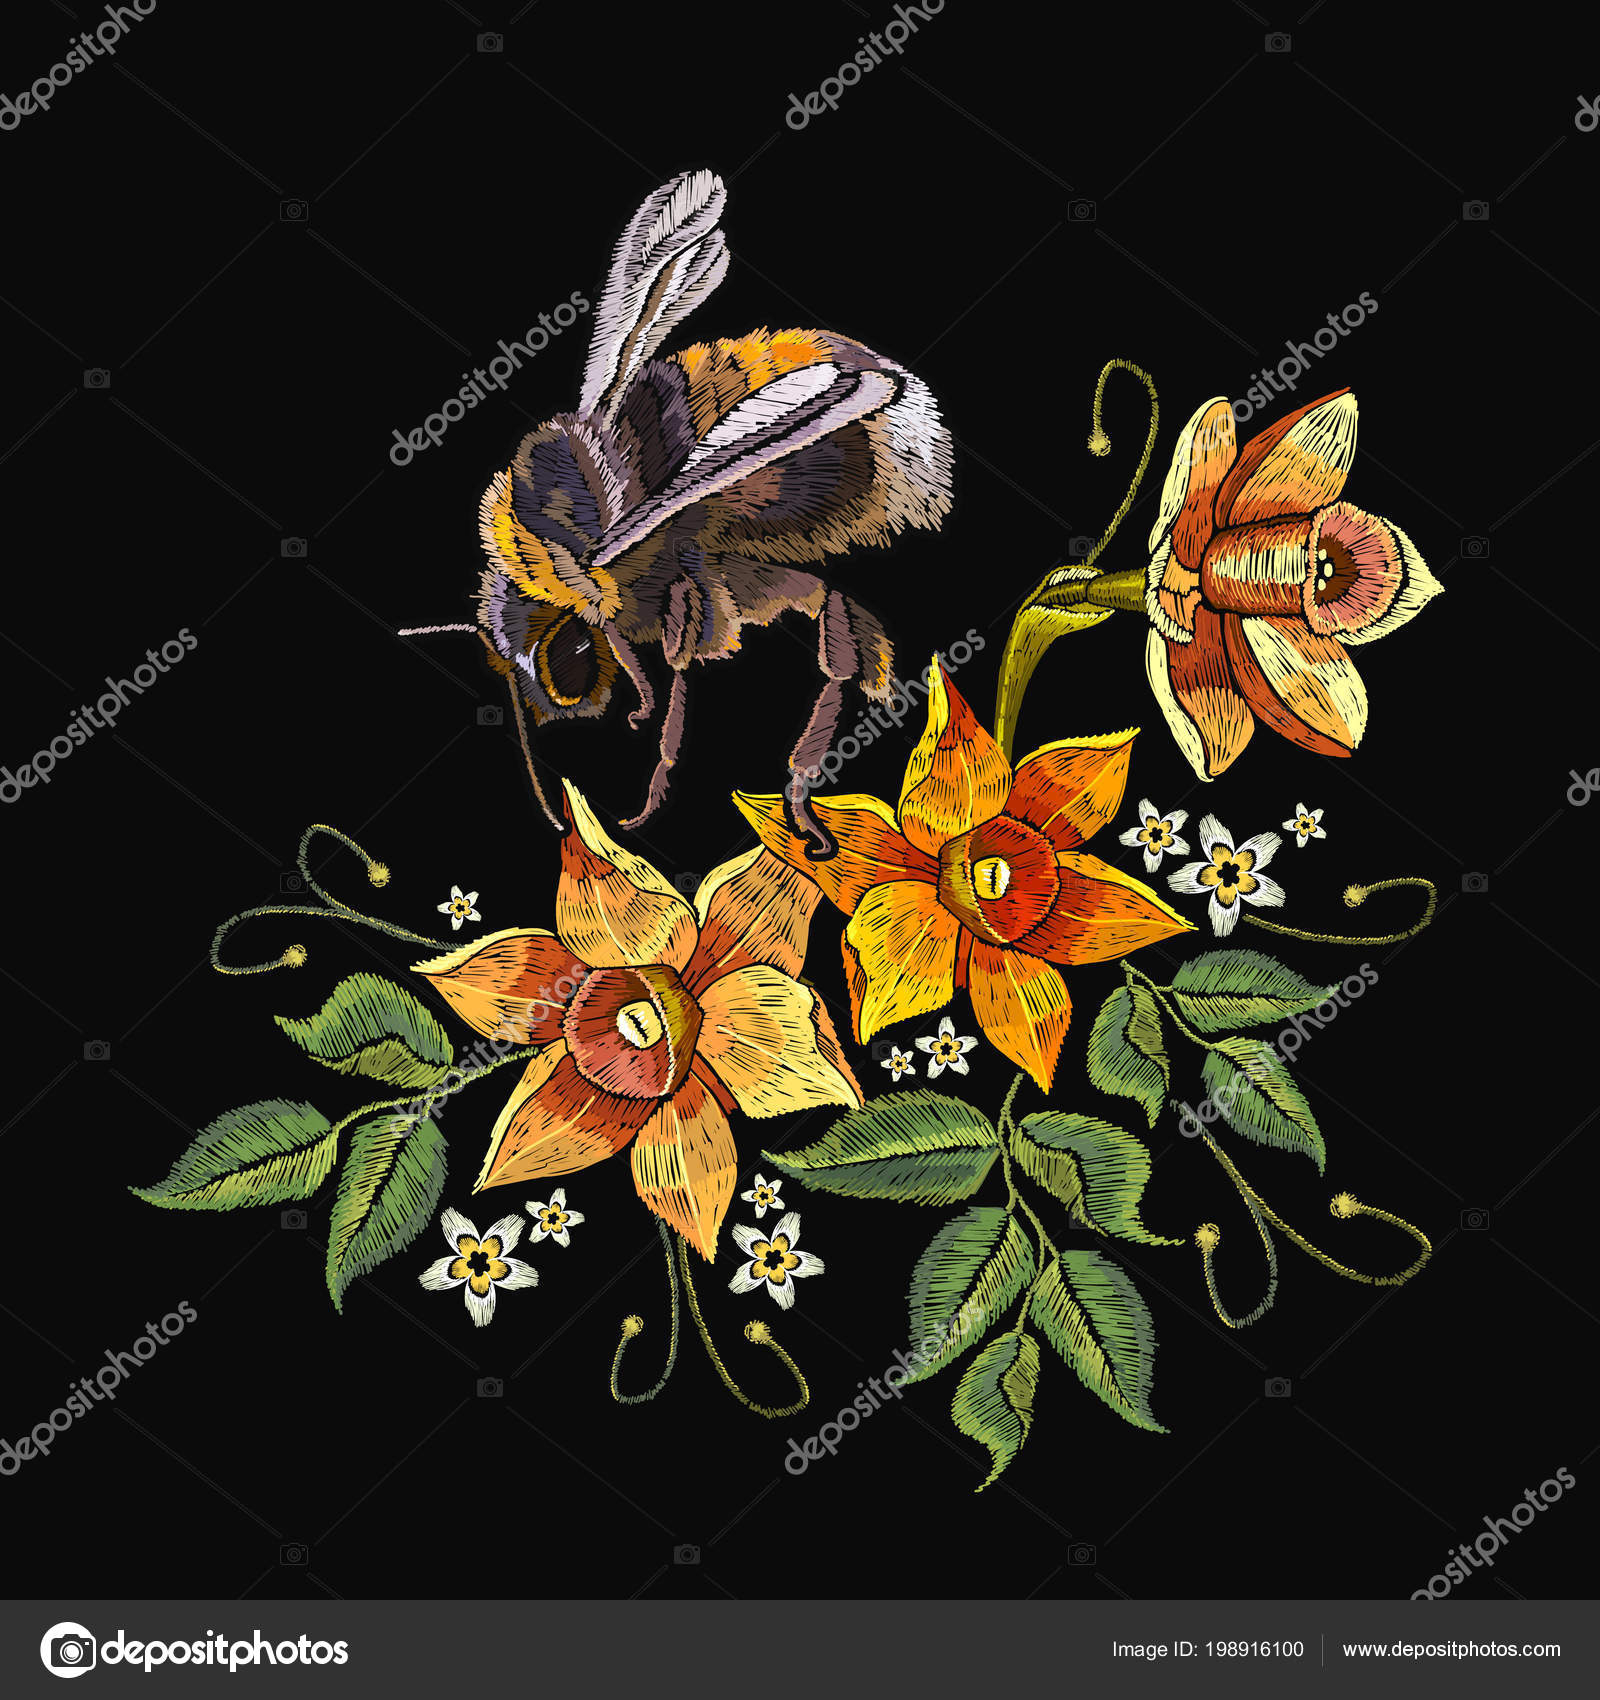 Bumble Bee Embroidery Pattern Narcissus Bumble Bee Embroidery Beautiful Daffodils Yellow Narcissus